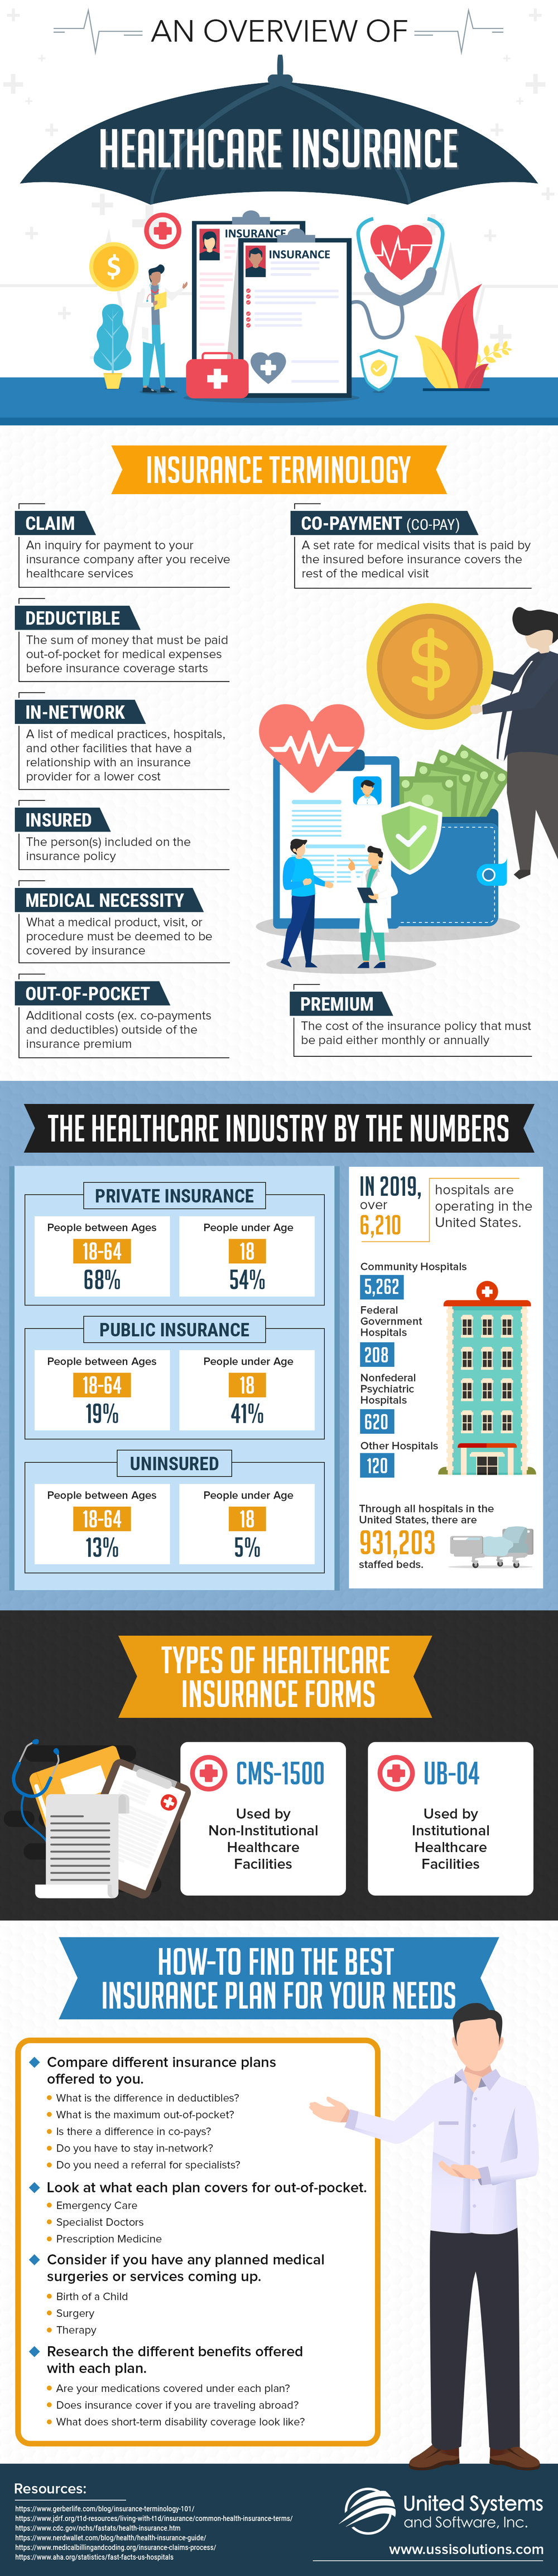 An Overview of Healthcare Insurance